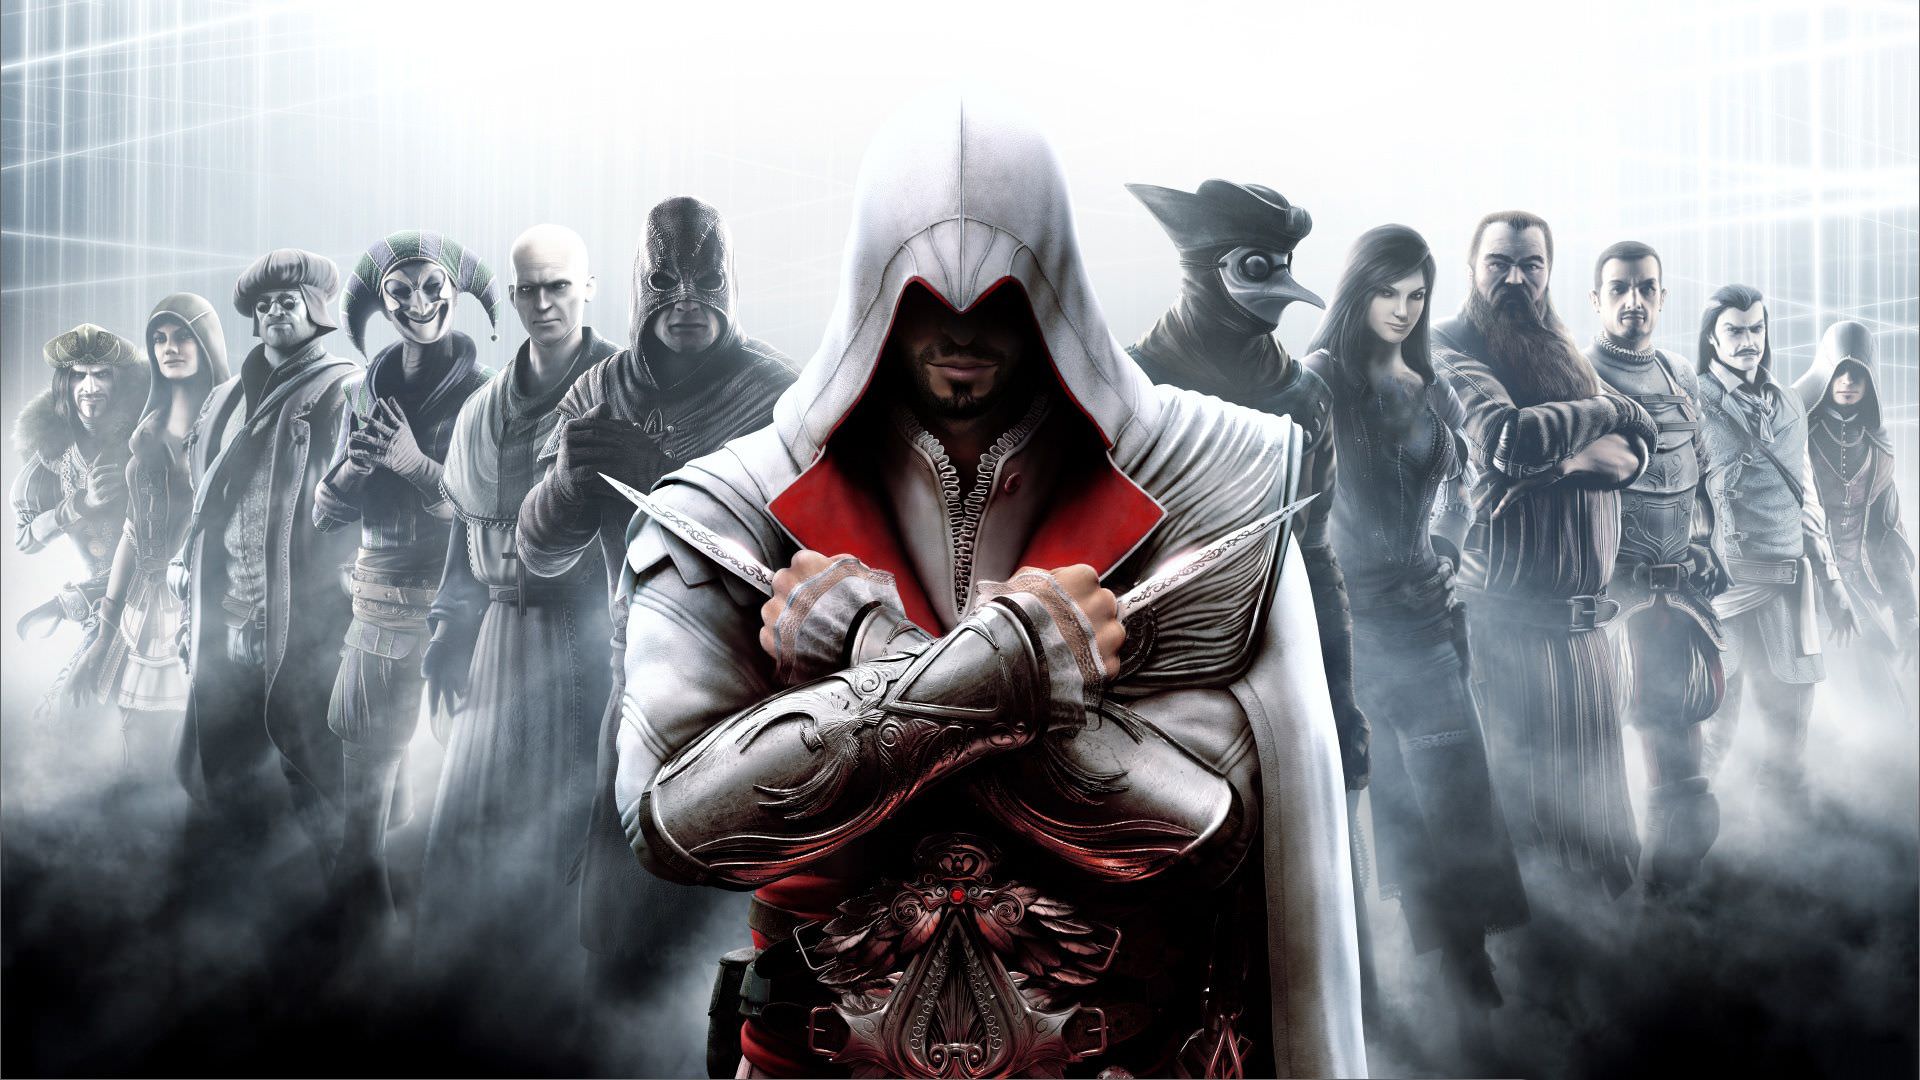 Assassin's Creed Brotherhood game poster